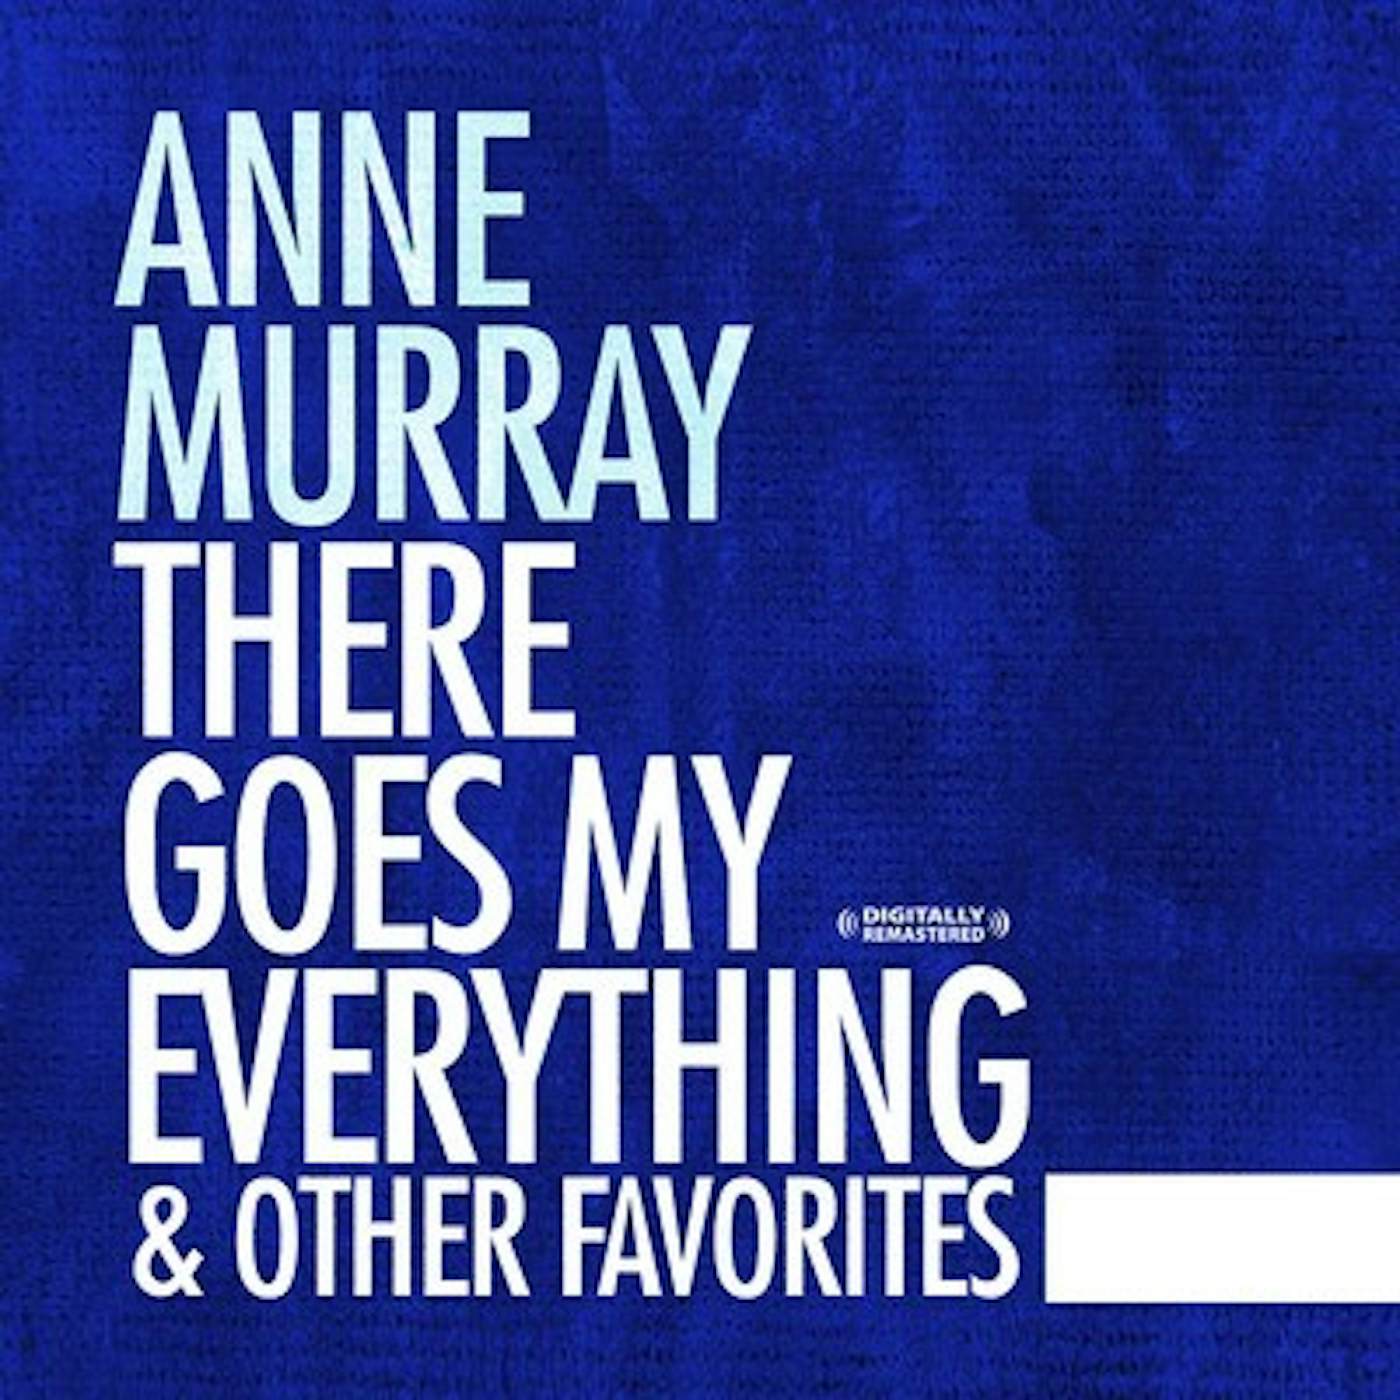 Anne Murray THERE GOES MY EVERYTHING & OTHER FAVORITES CD